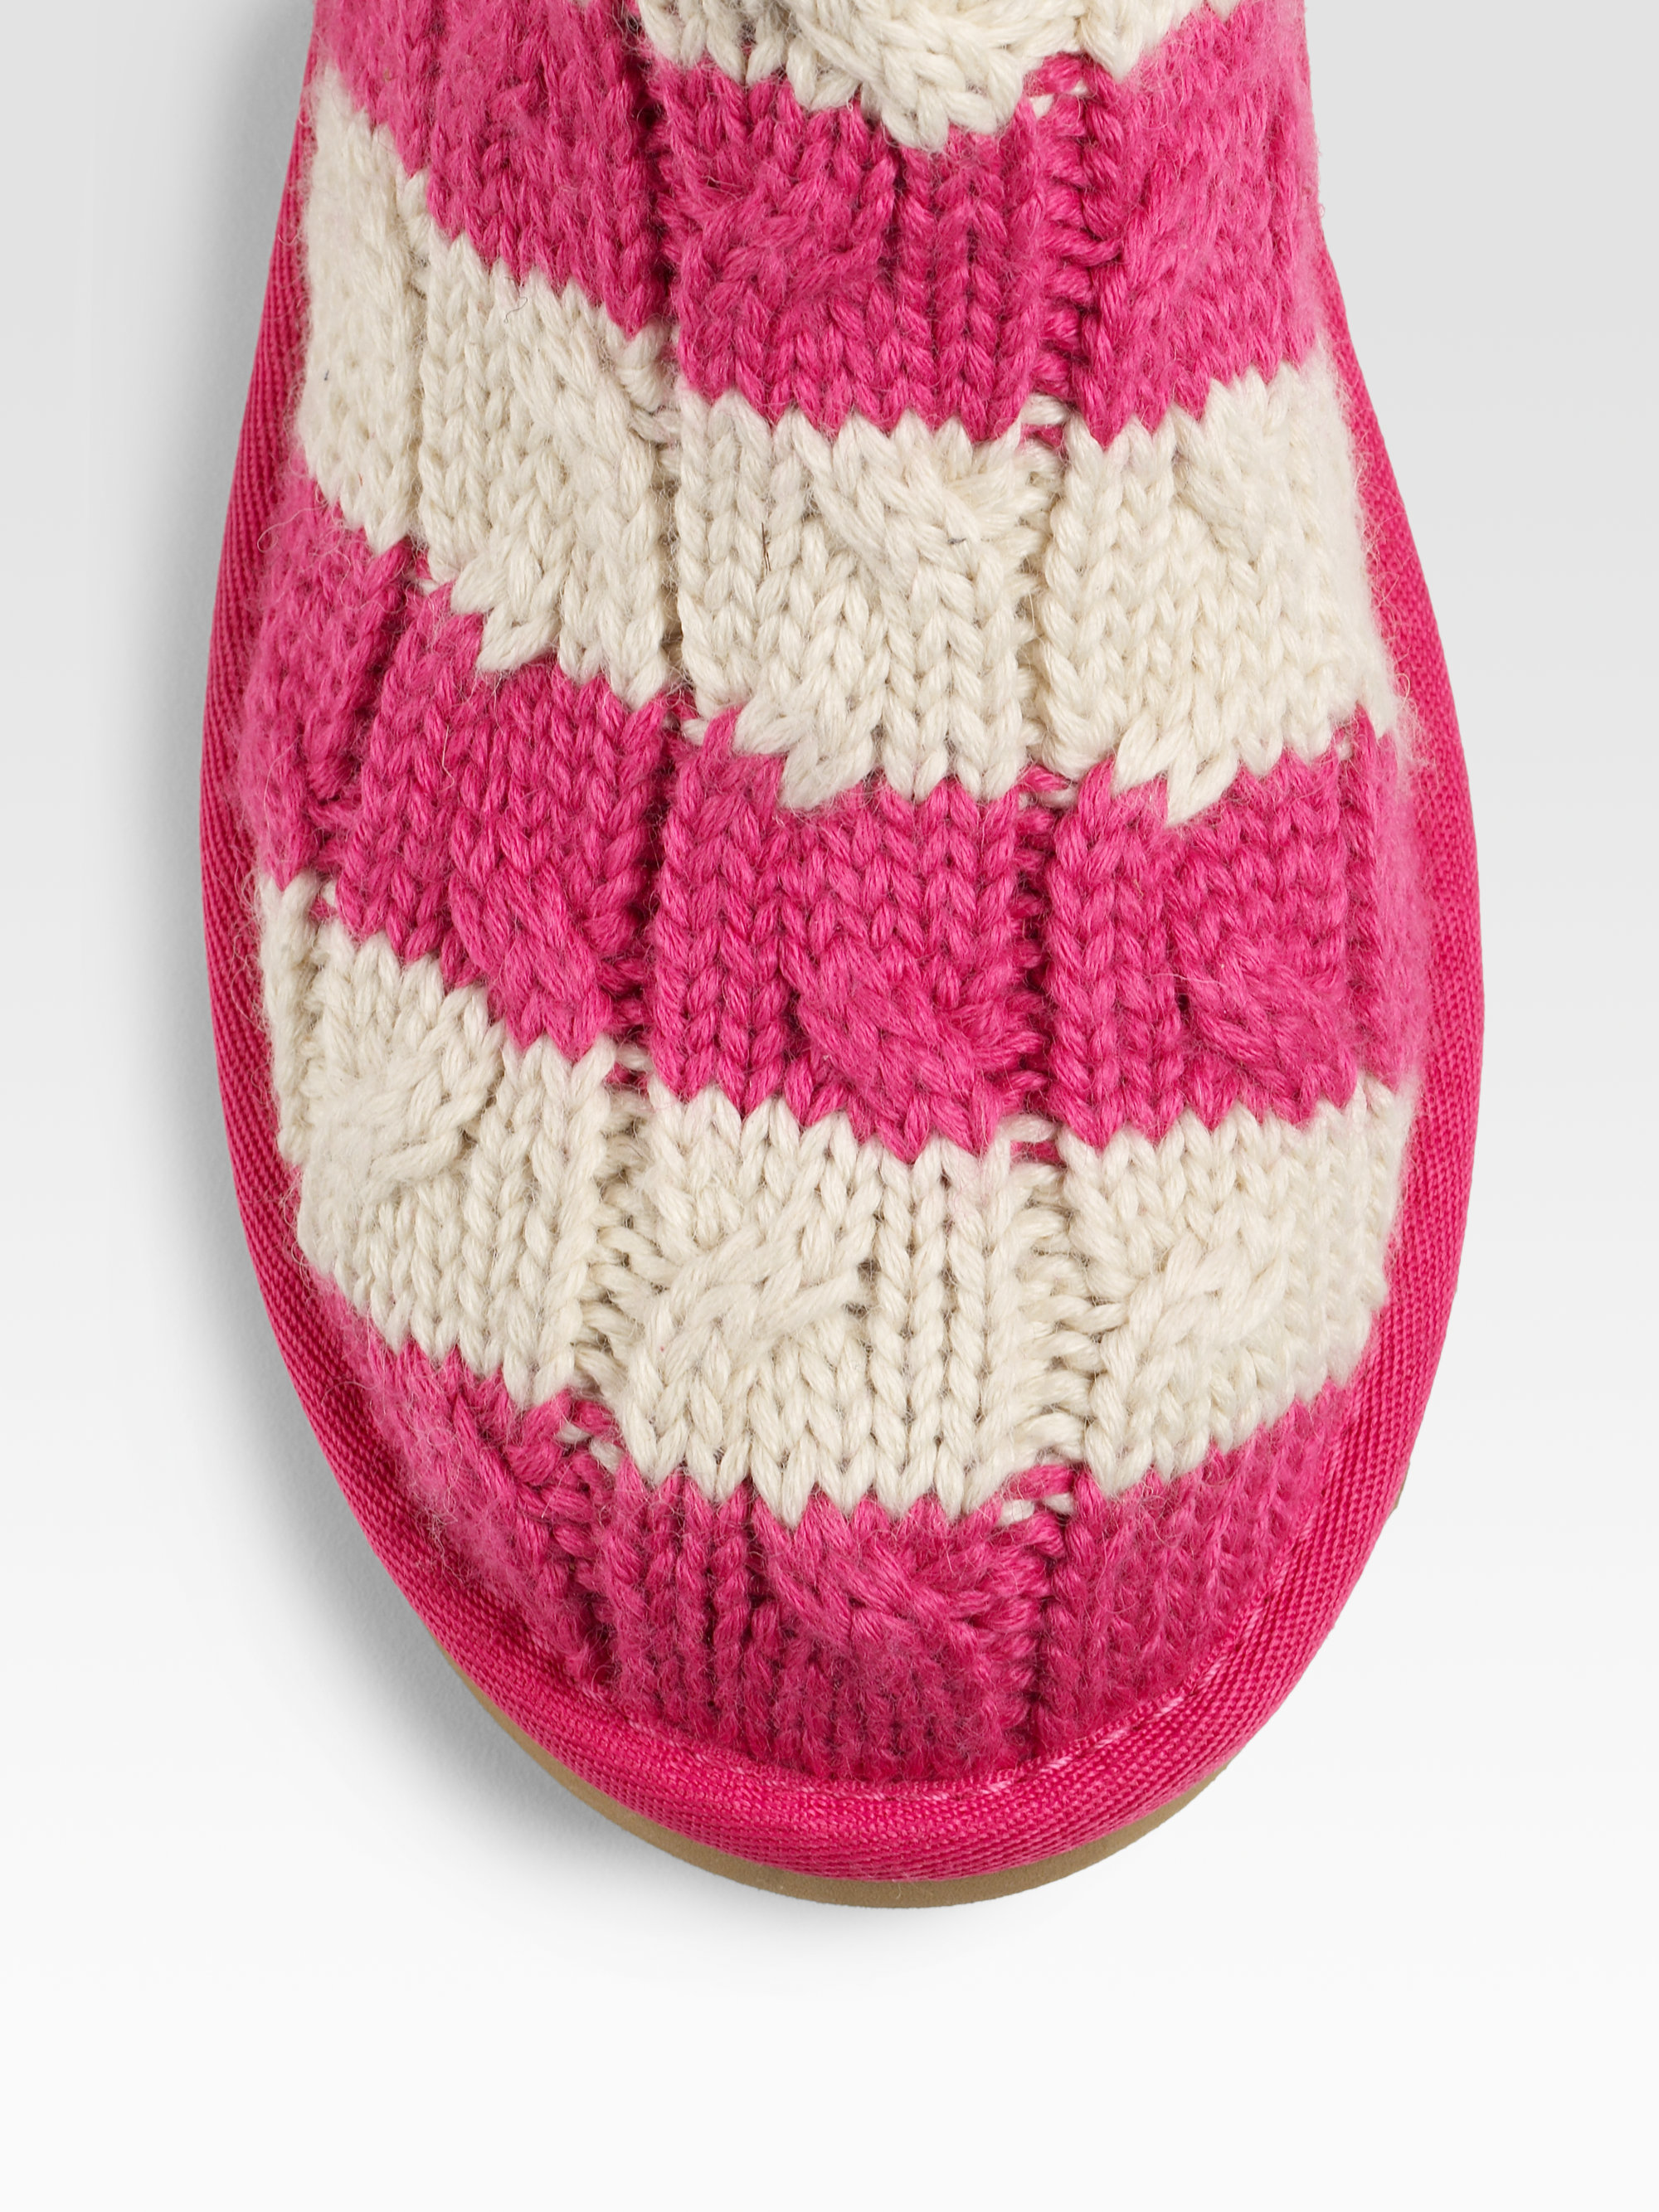 UGG Striped Cable Knit Boots in Pink | Lyst